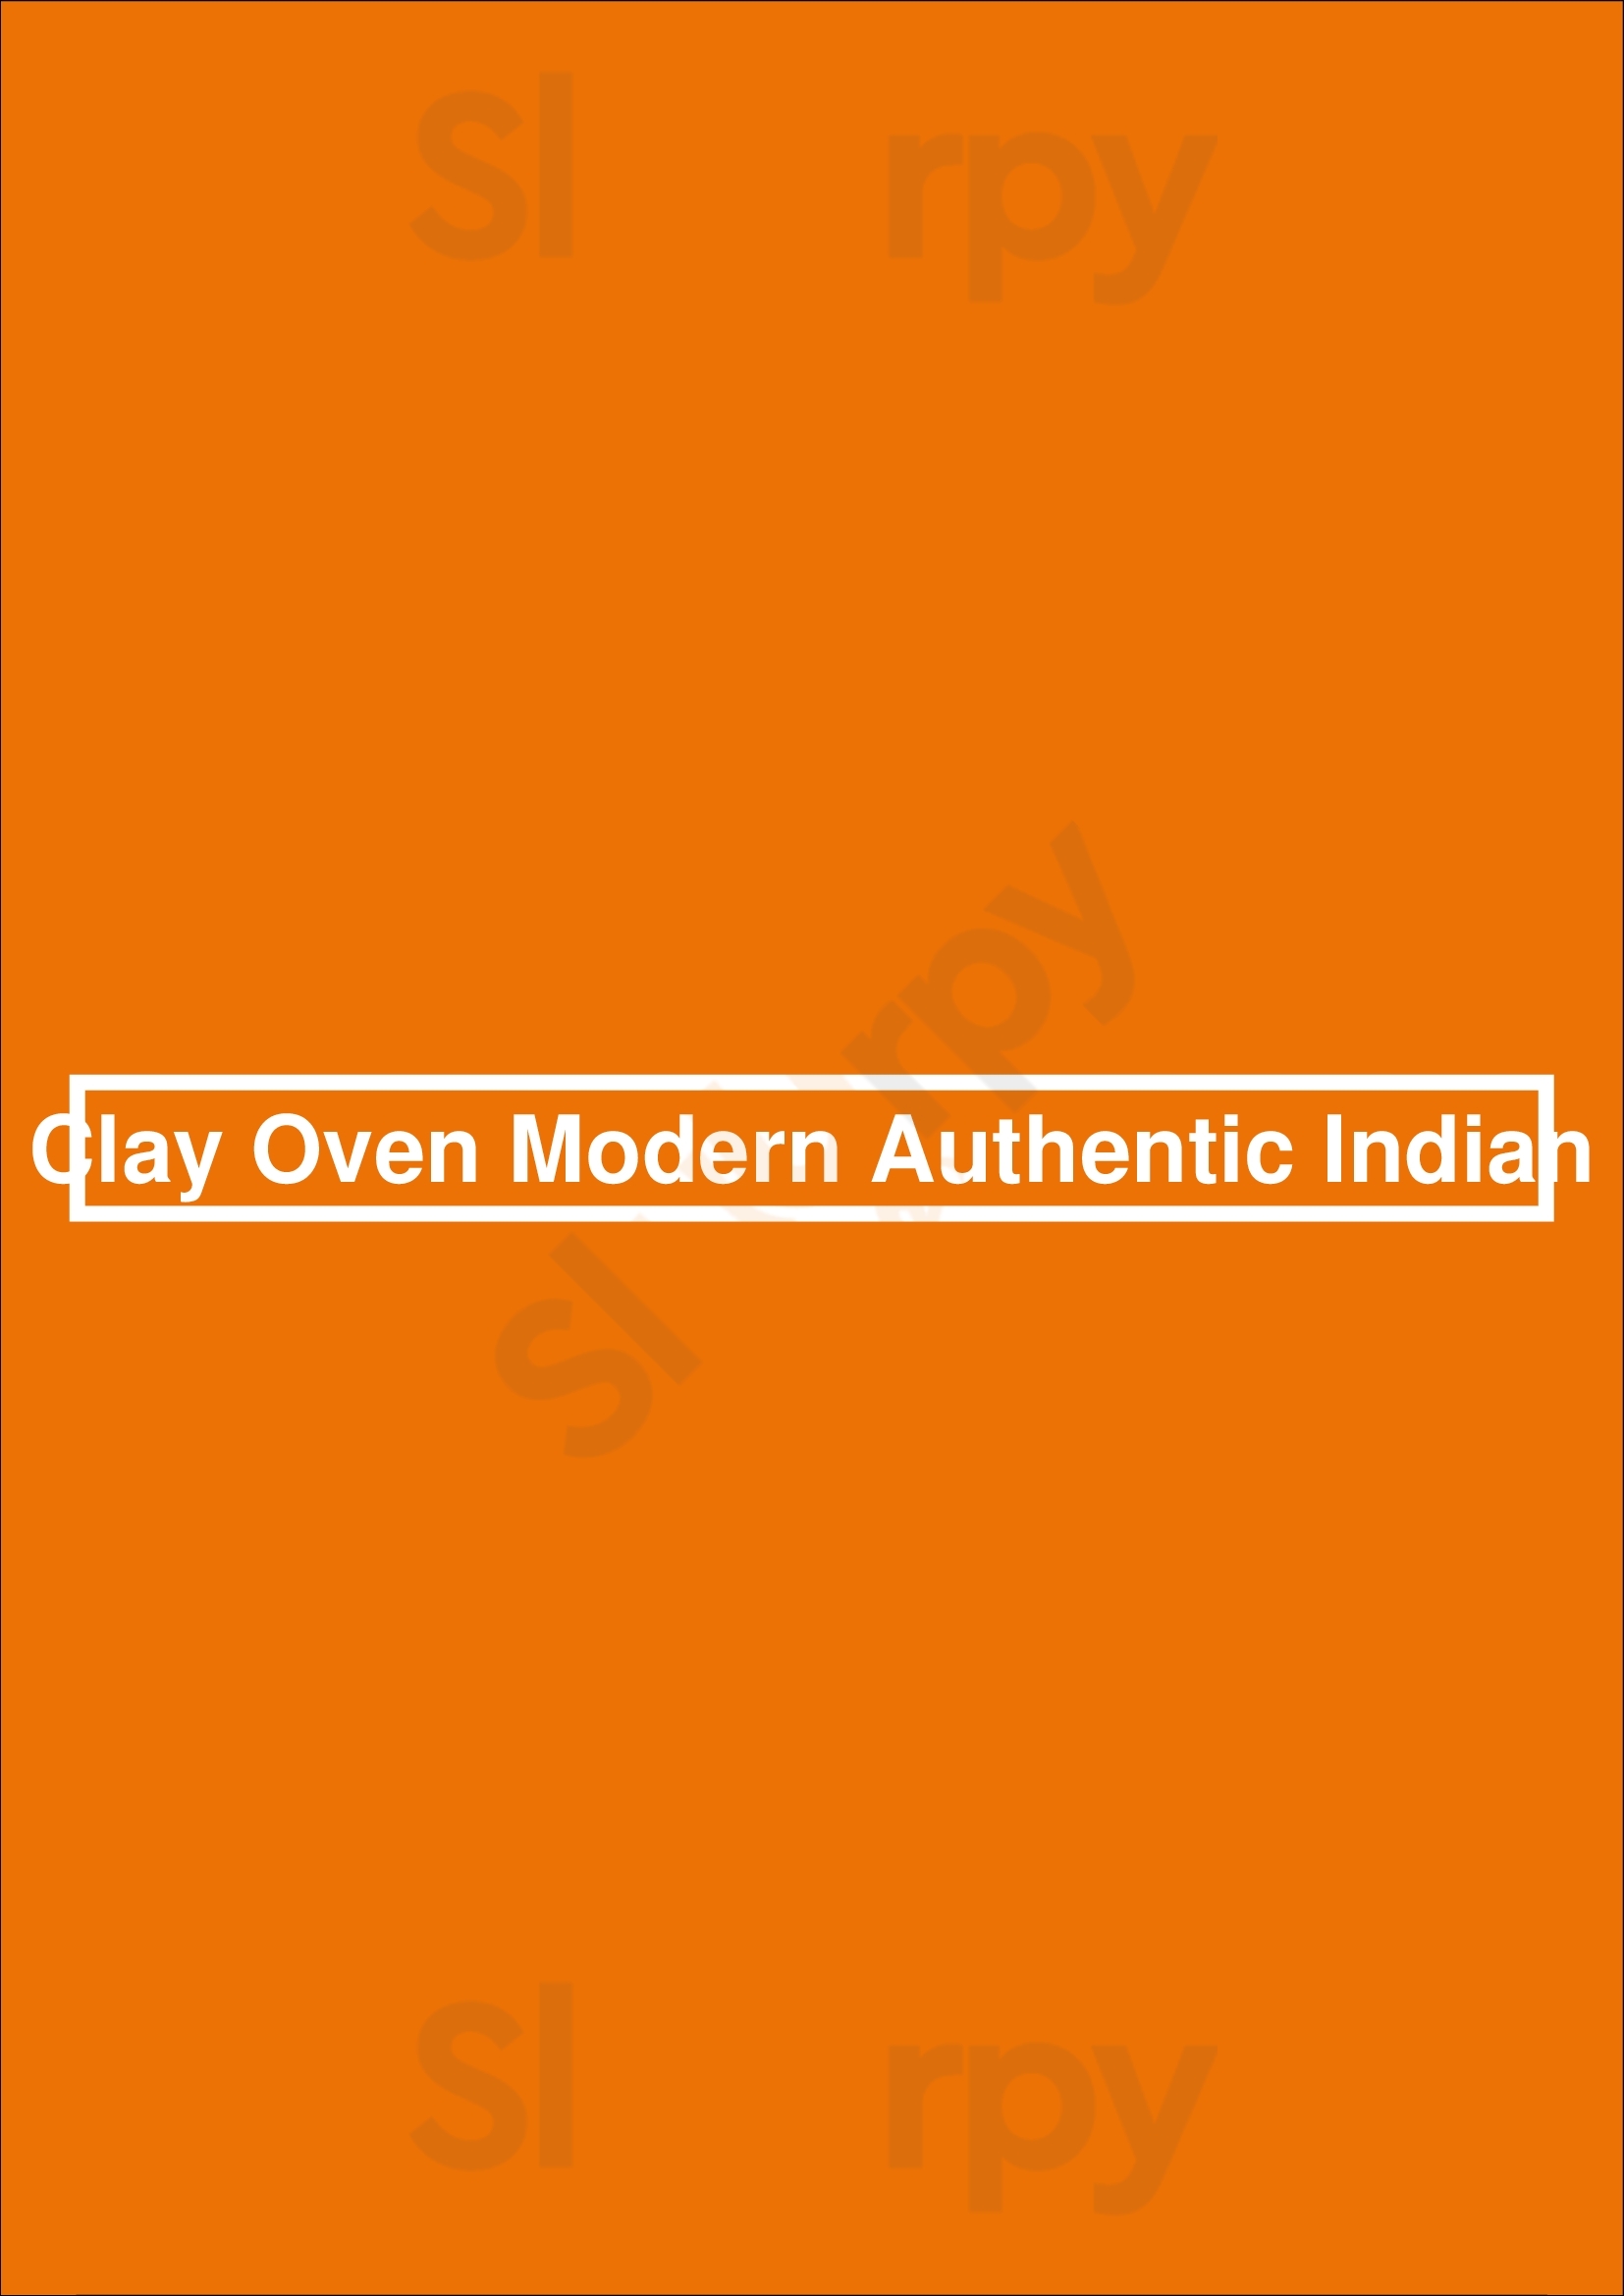 Clay Oven Modern Authentic Indian Calgary Menu - 1